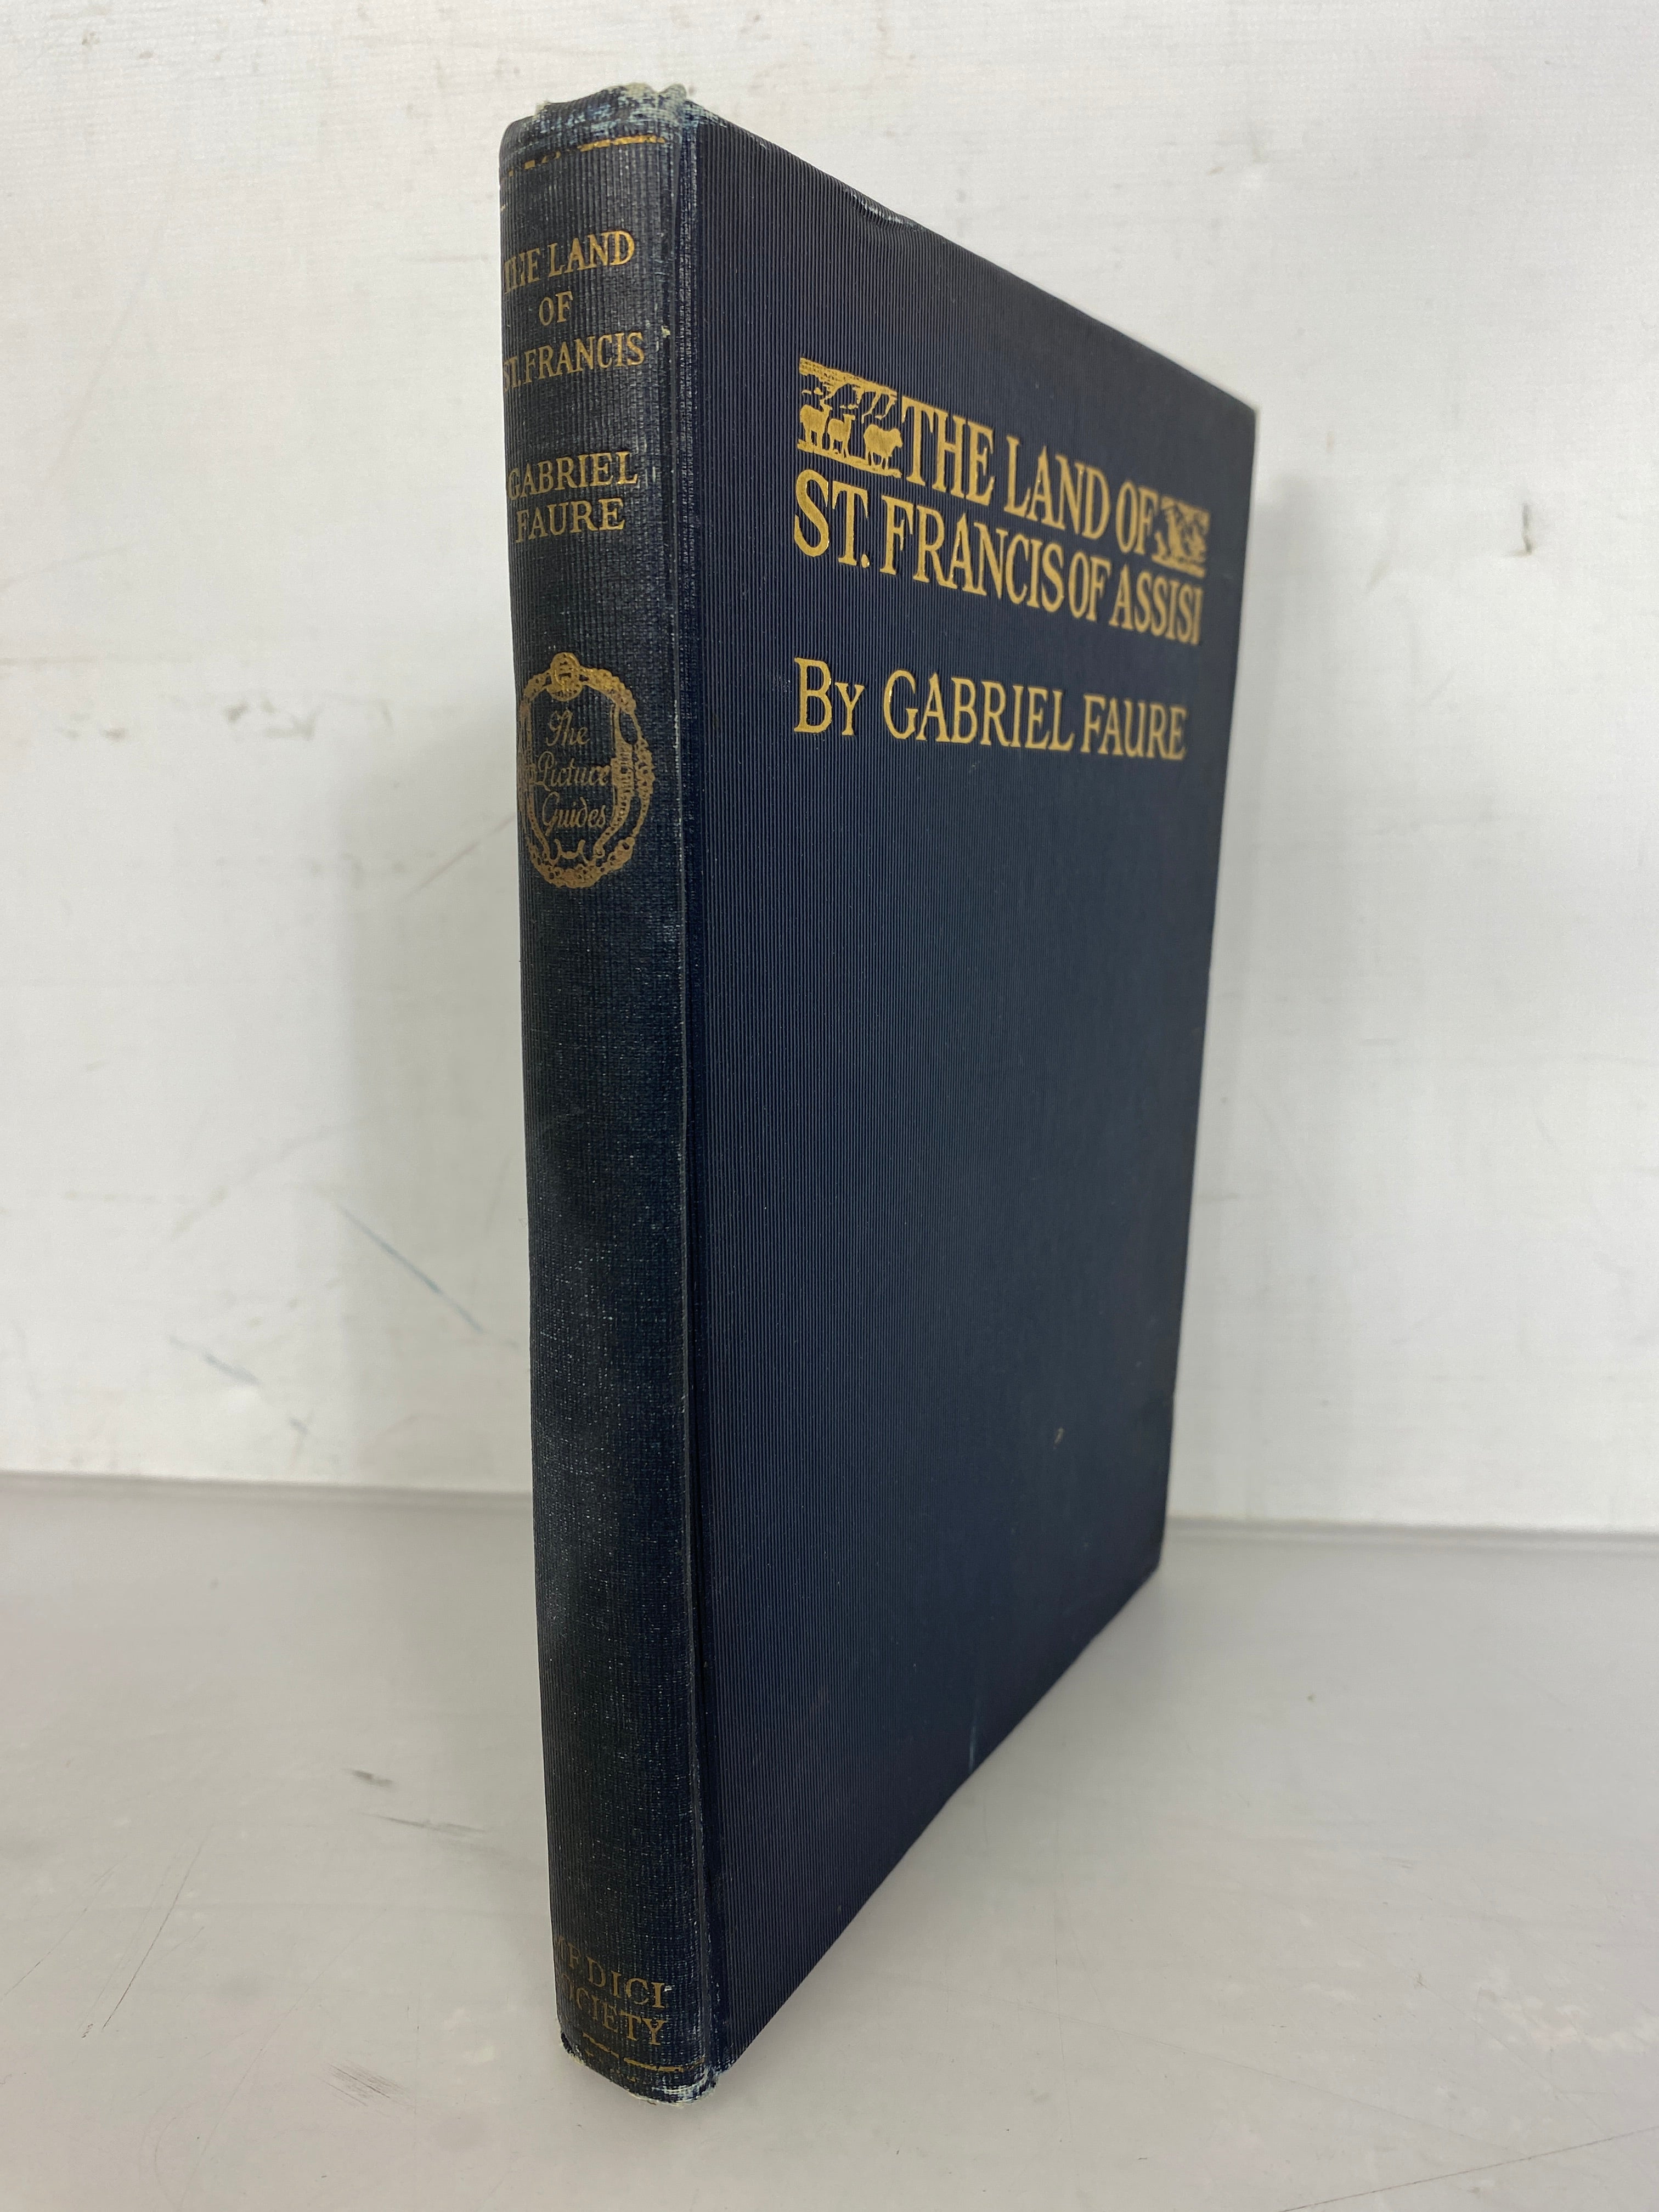 The Land of St Francis of Assisi by Gabriel Faure Antique First Edition 1924 HC